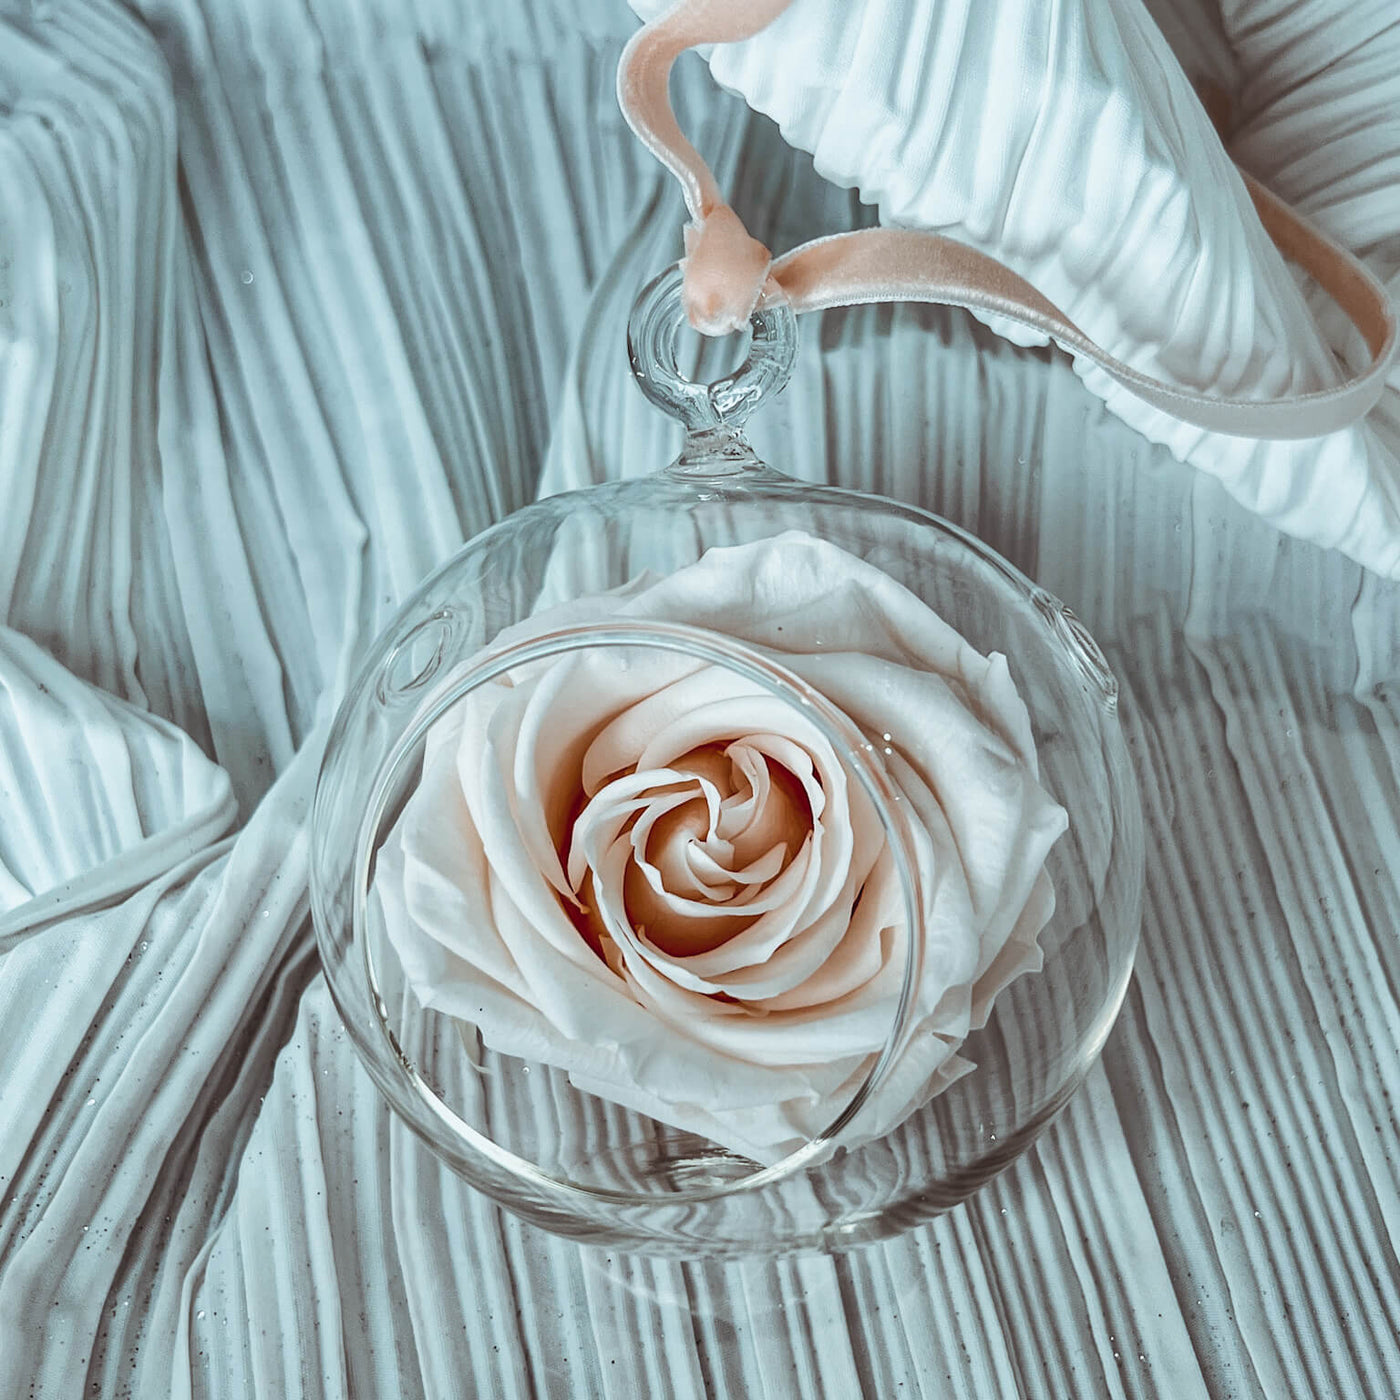 Forever rose in a round clear glass ornament